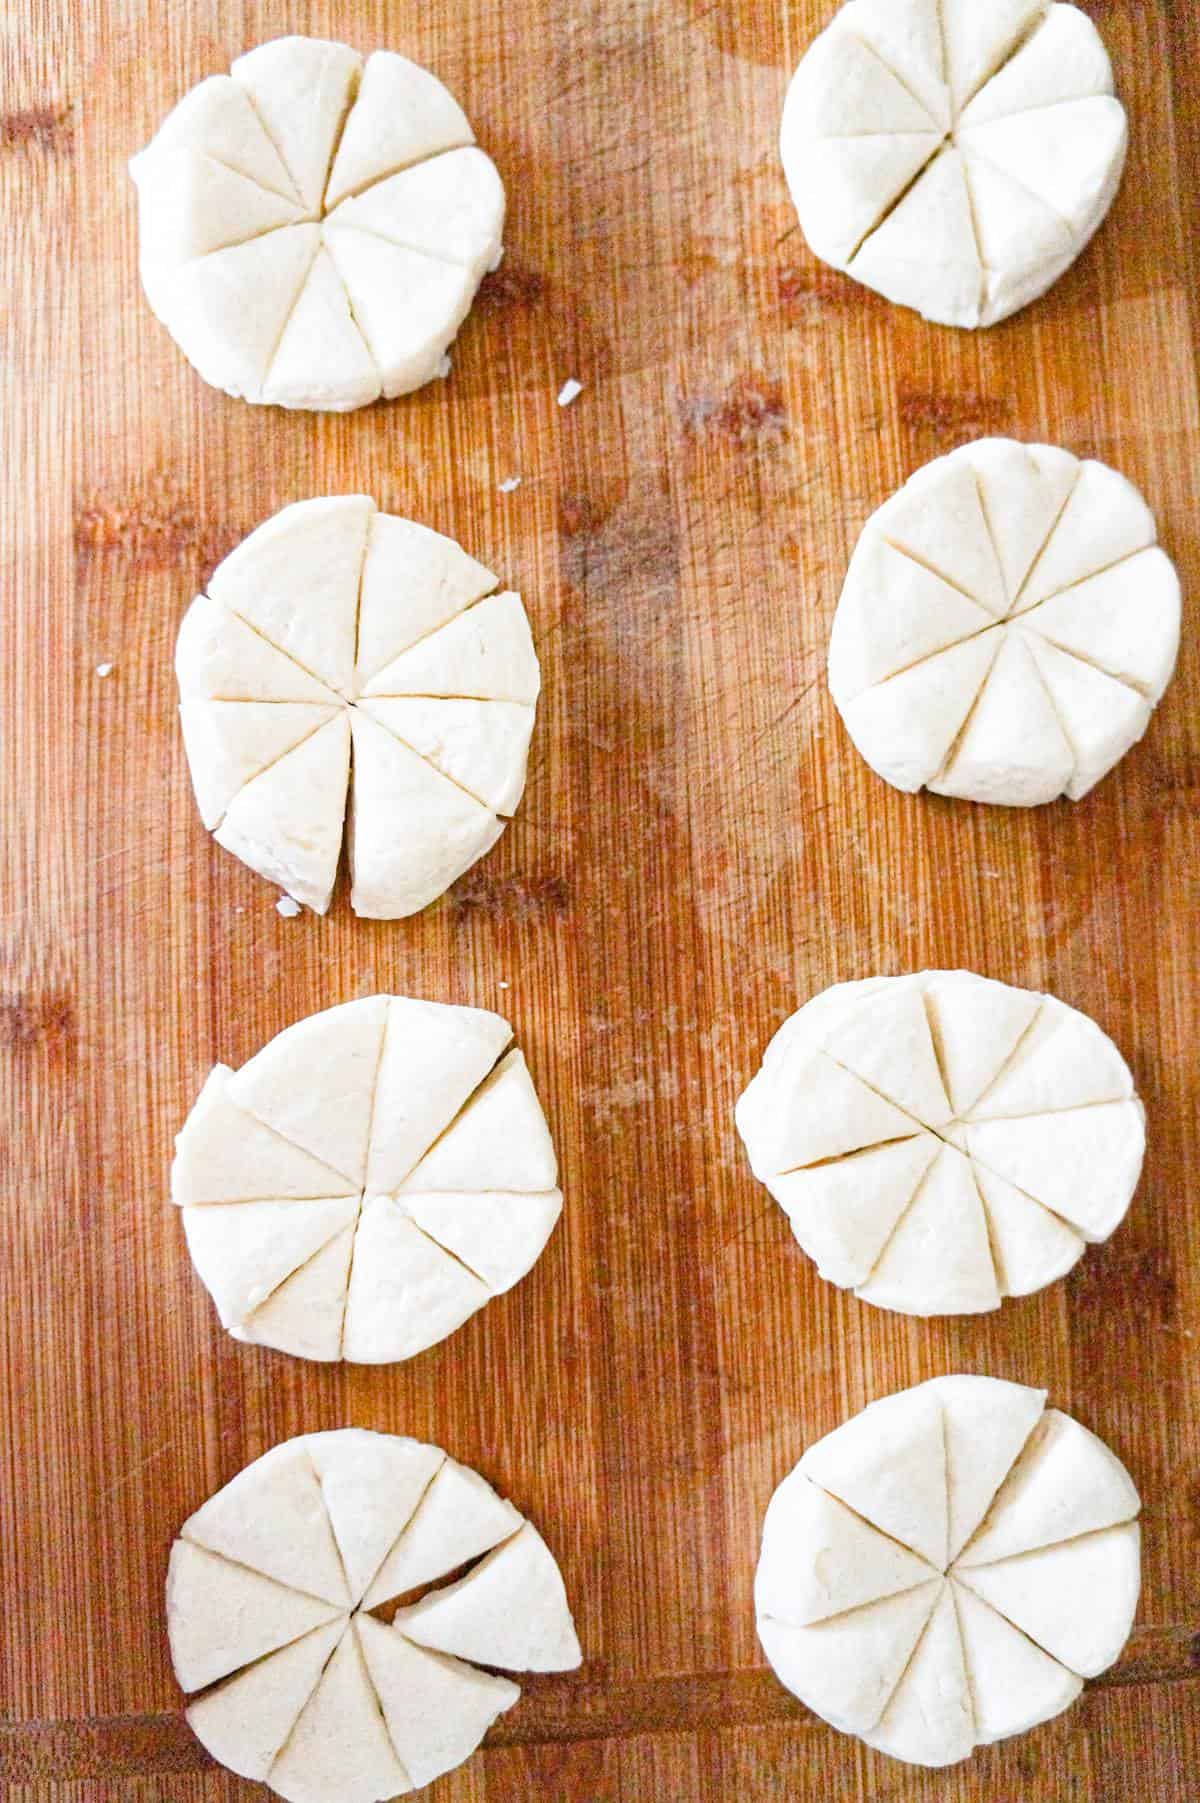 raw Pillsbury biscuits cut into 8 pieces